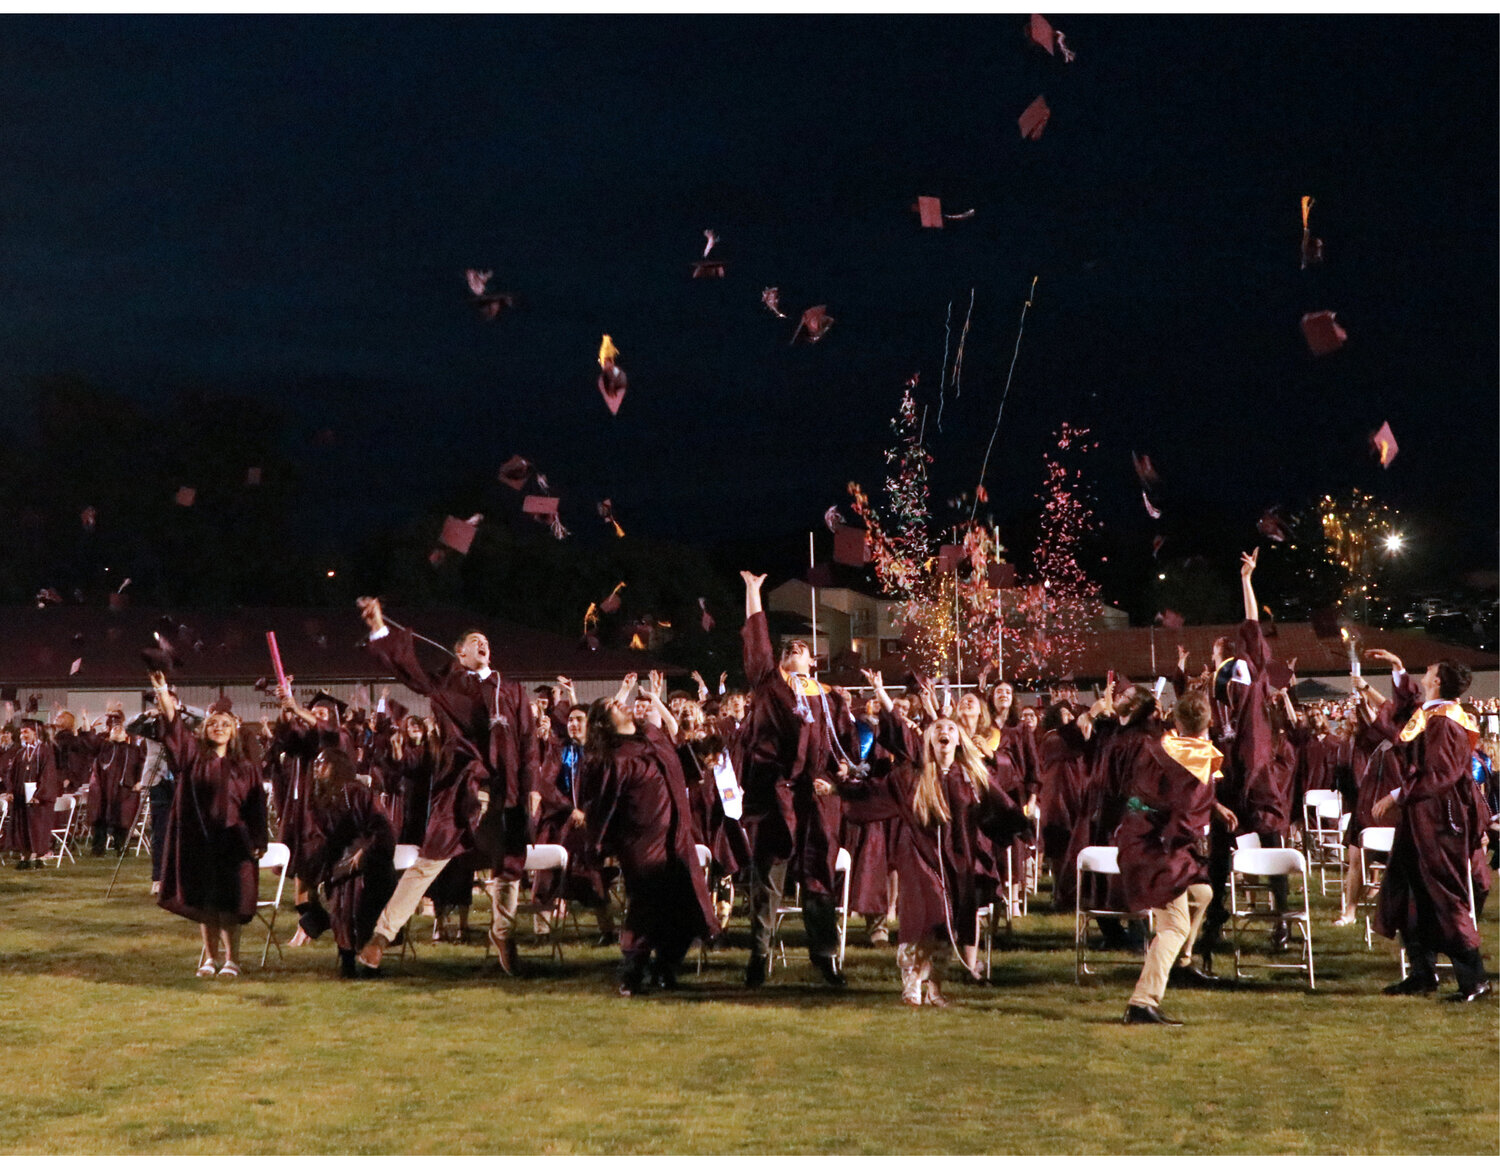 Members of the White County High School Class of 2023 throw their hats in the air as part of the tradition that signifies the end of the ceremony. (Photo by CHRIS BRIGHT)